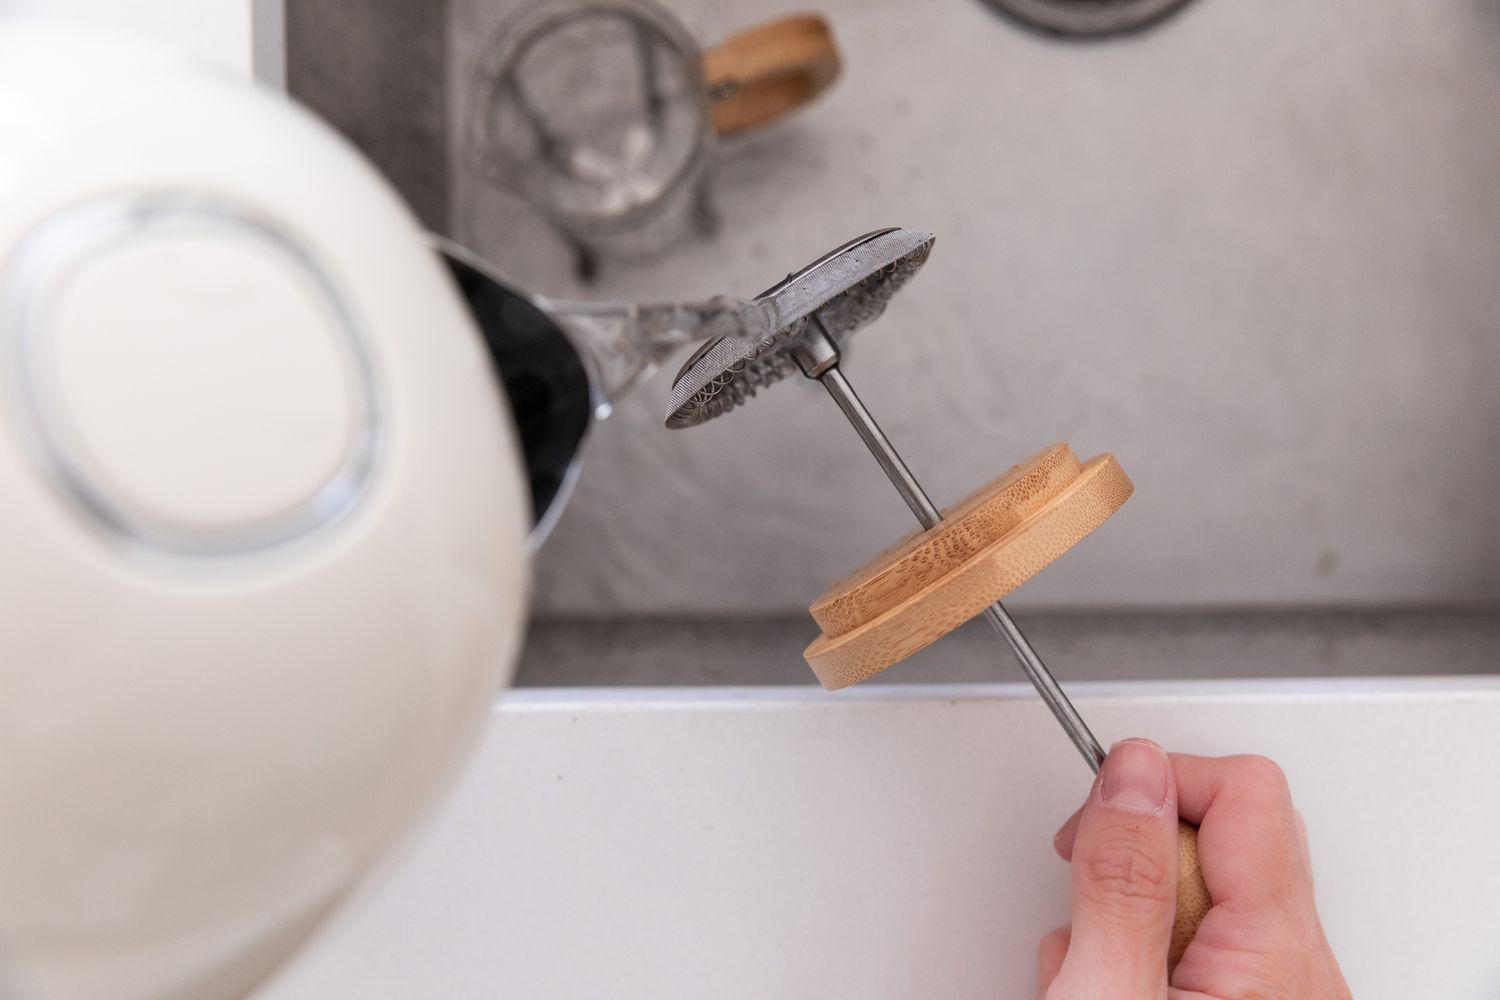 rinsing the plunger with hot water